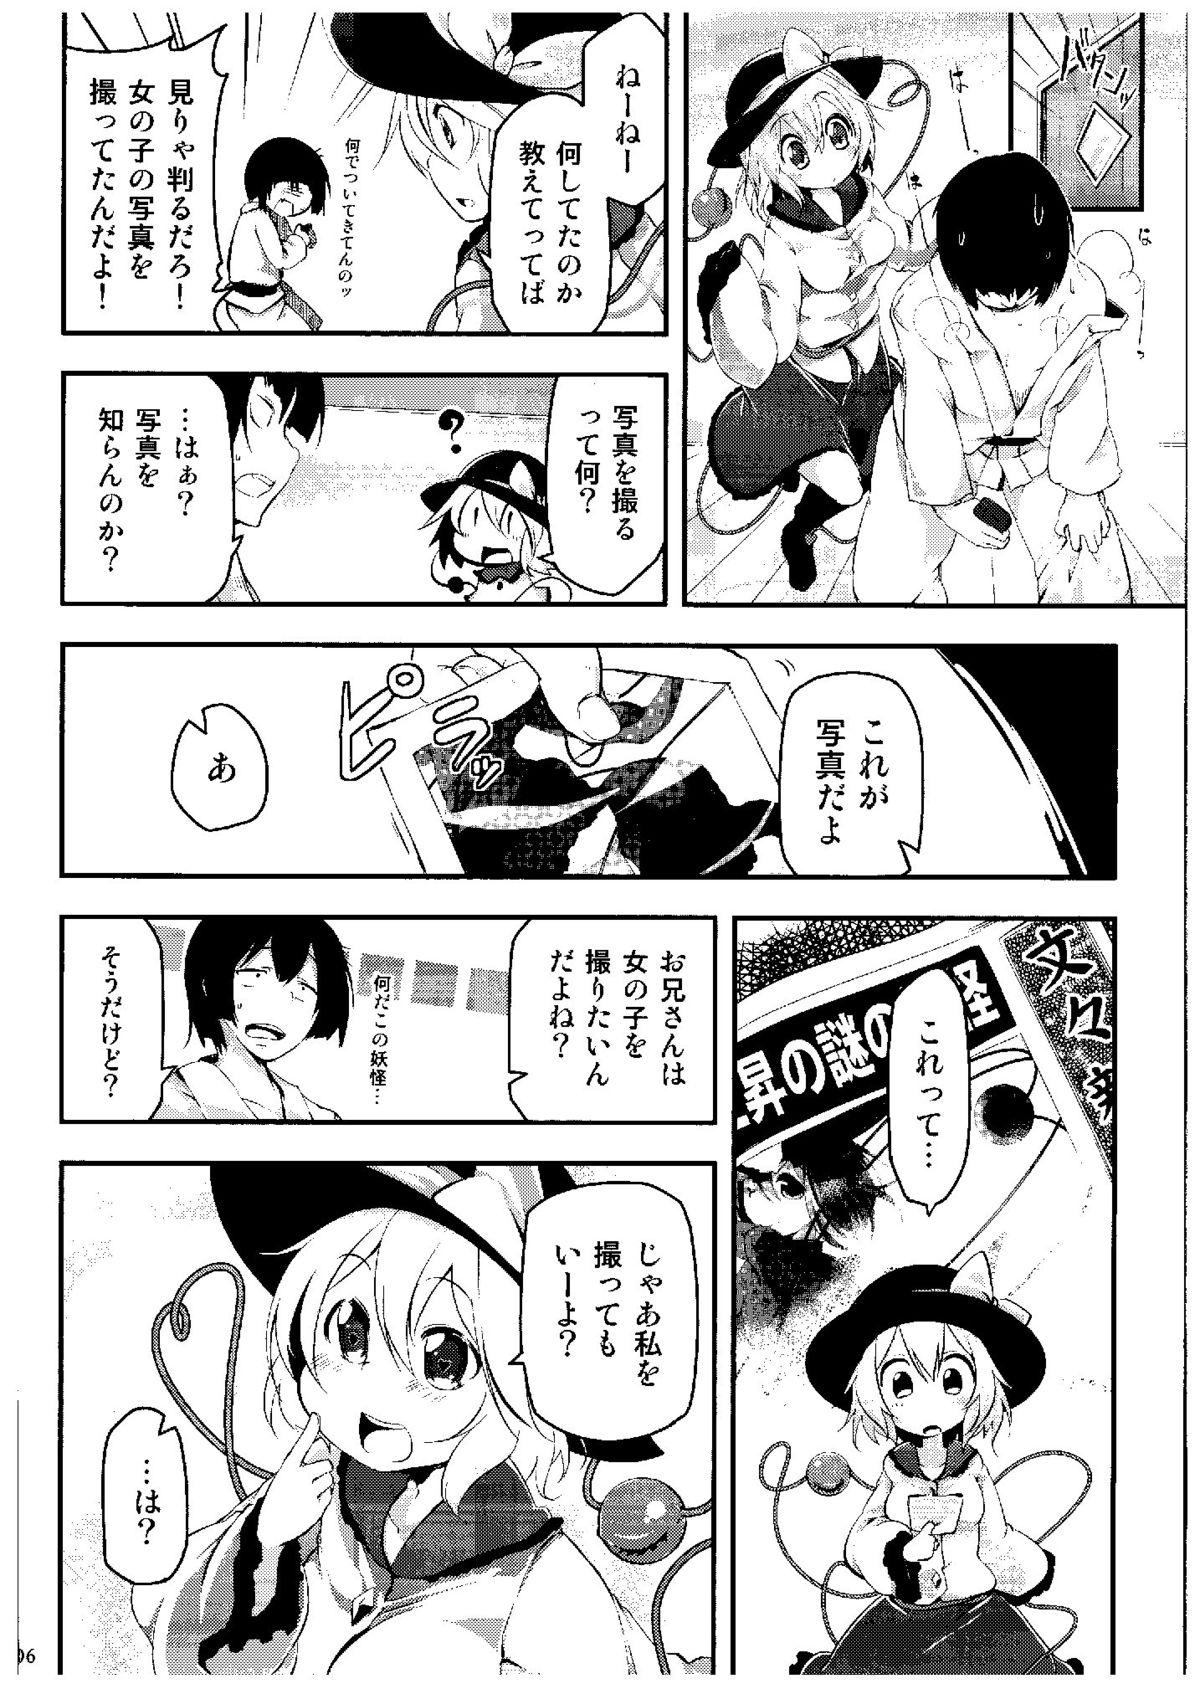 Butts Kite Mite Sawatte - Touhou project Chacal - Page 5